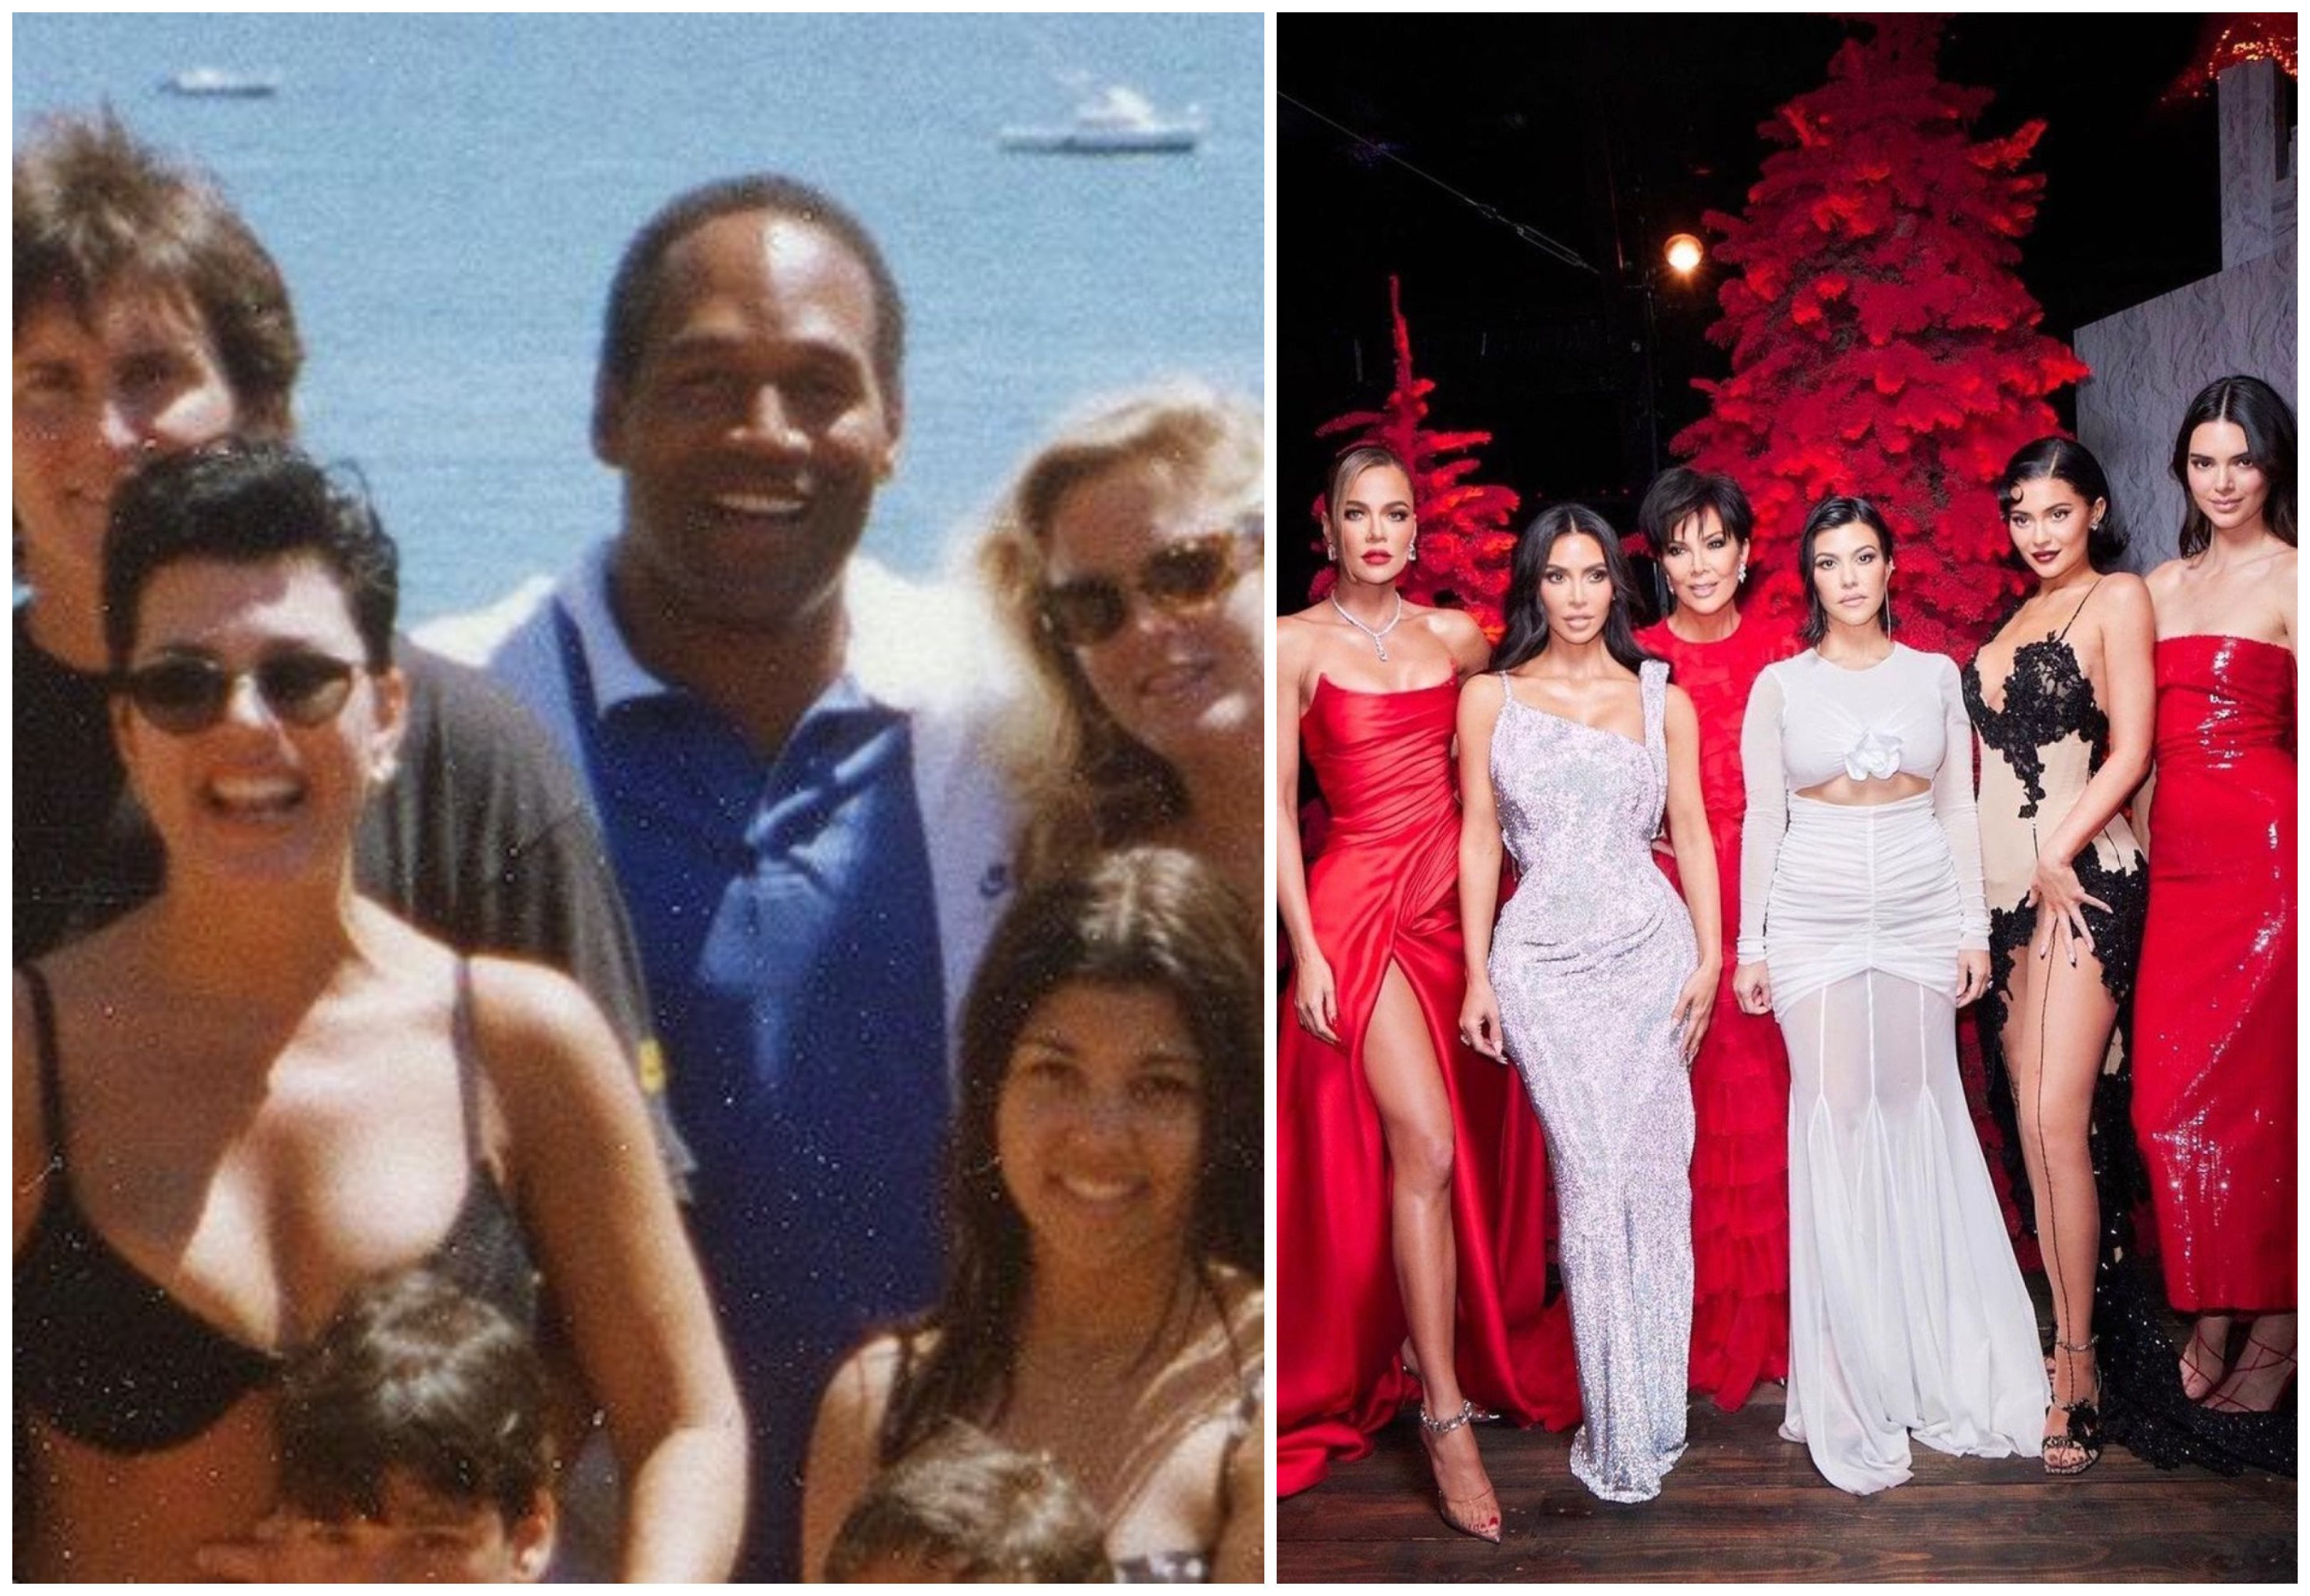 The Kardashian children referred to OJ Simpson as “Uncle OJ” – here’s how they were linked to the late NFL player. Photos: @PrettyCorrupt1/X, @kardashians/Instagram